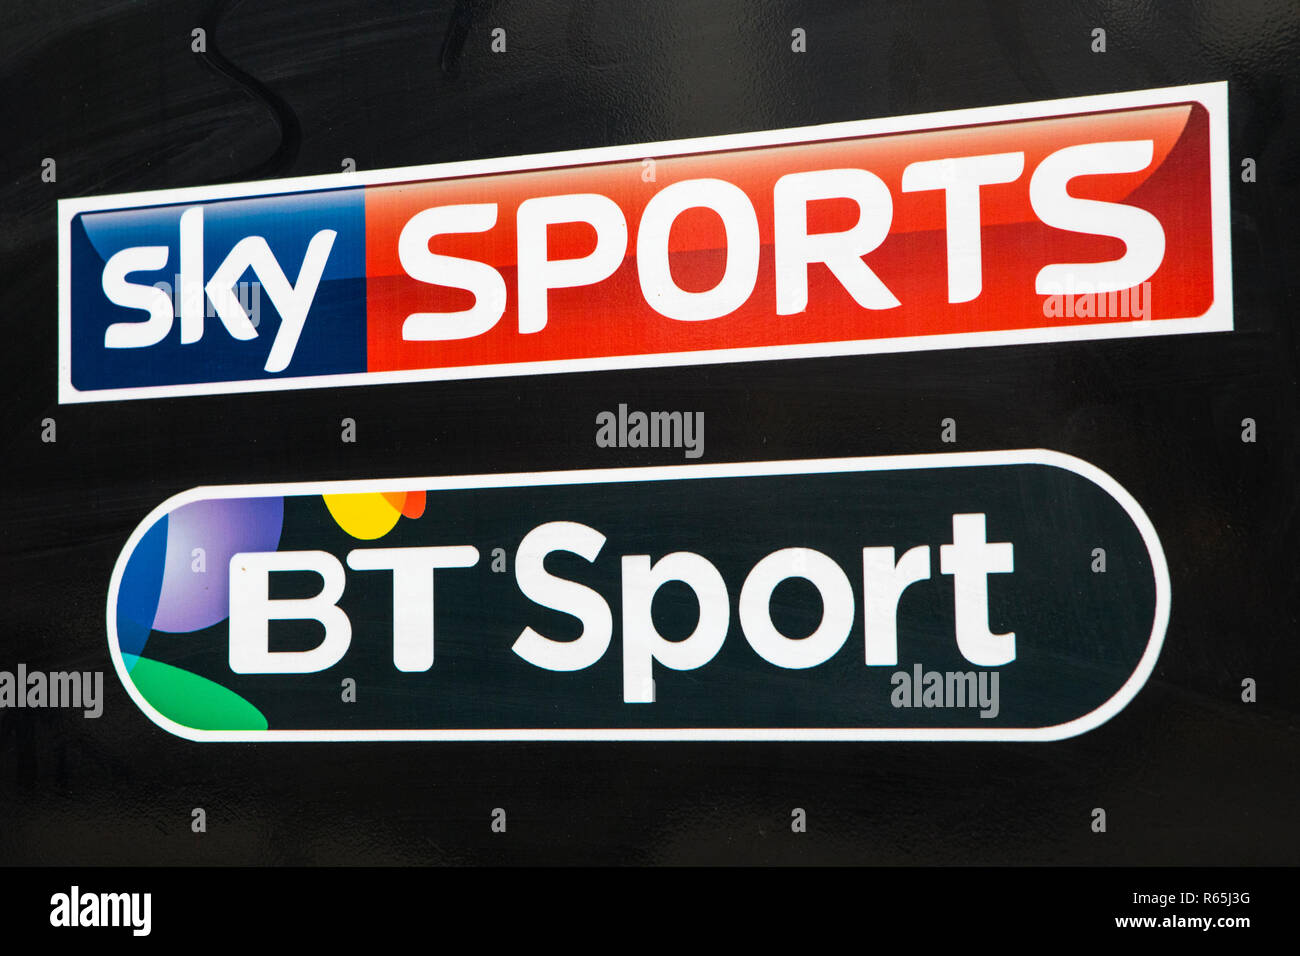 COVENTRY, UK - JULY 26TH 2018: A close-up of the logos for Sky Sports and BT Sport, pictured on a public house sign, on 26th July 2018. Stock Photo